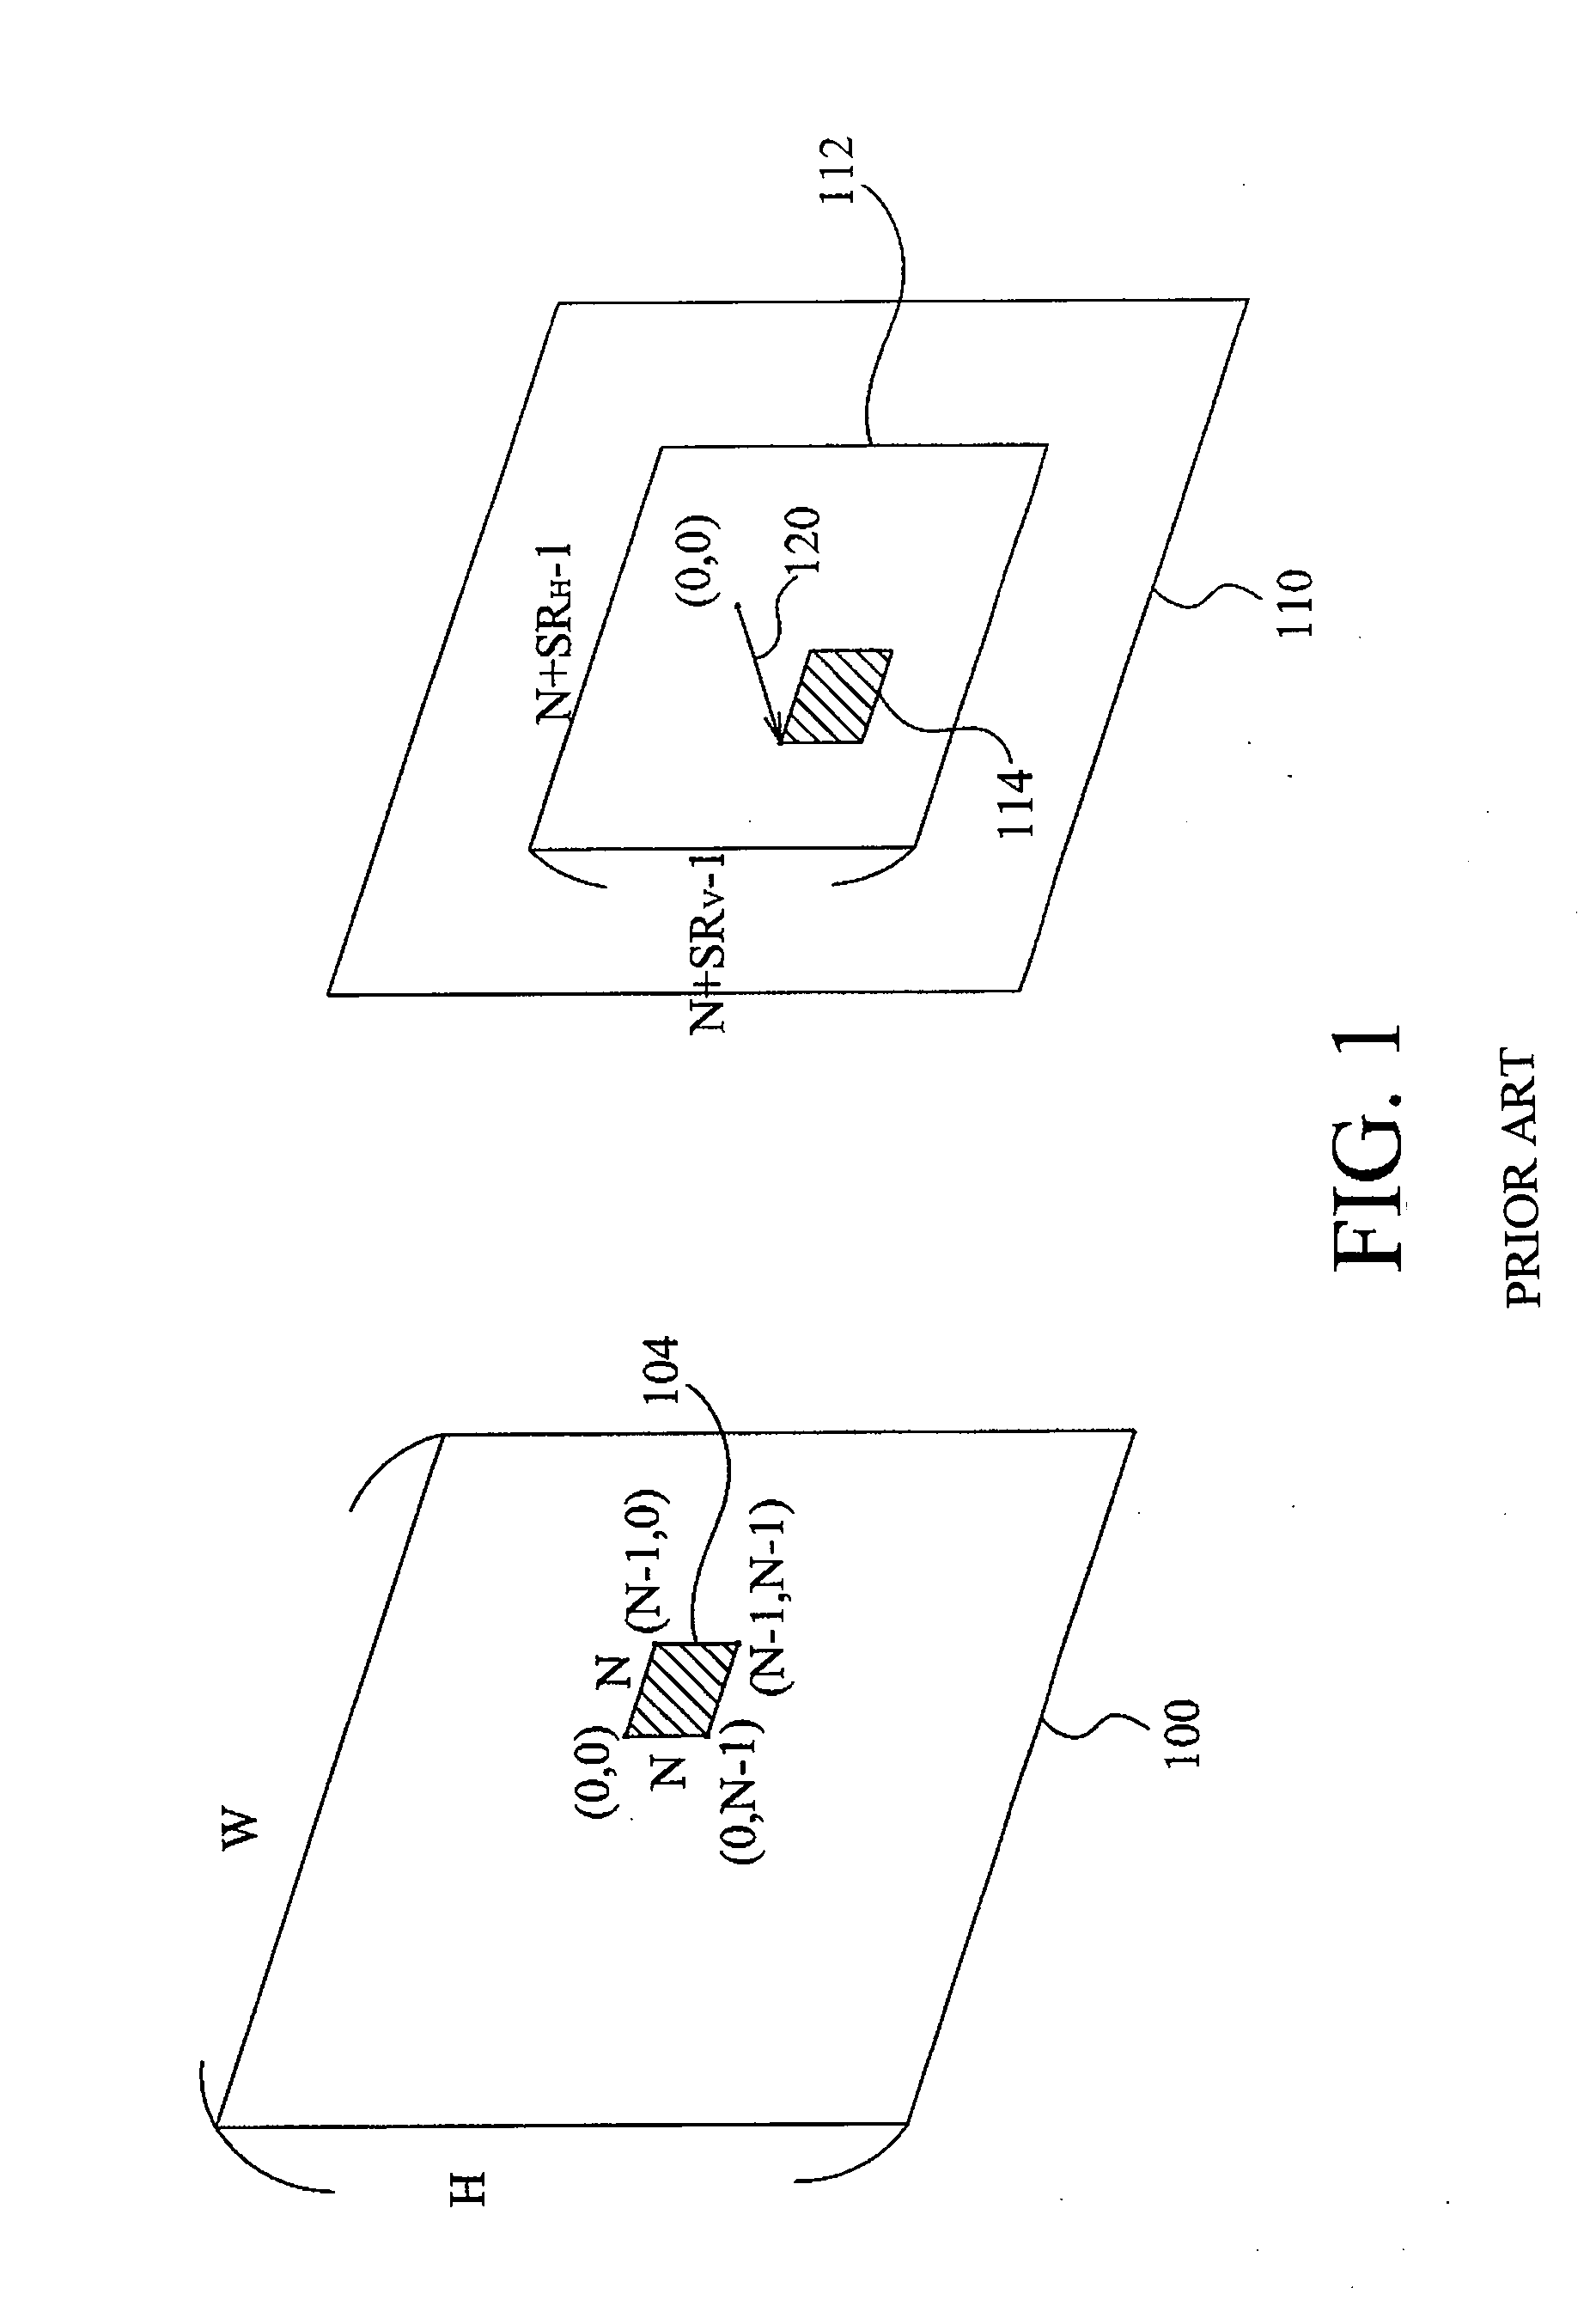 Low-power and high-performance video coding method for performing motion estimation